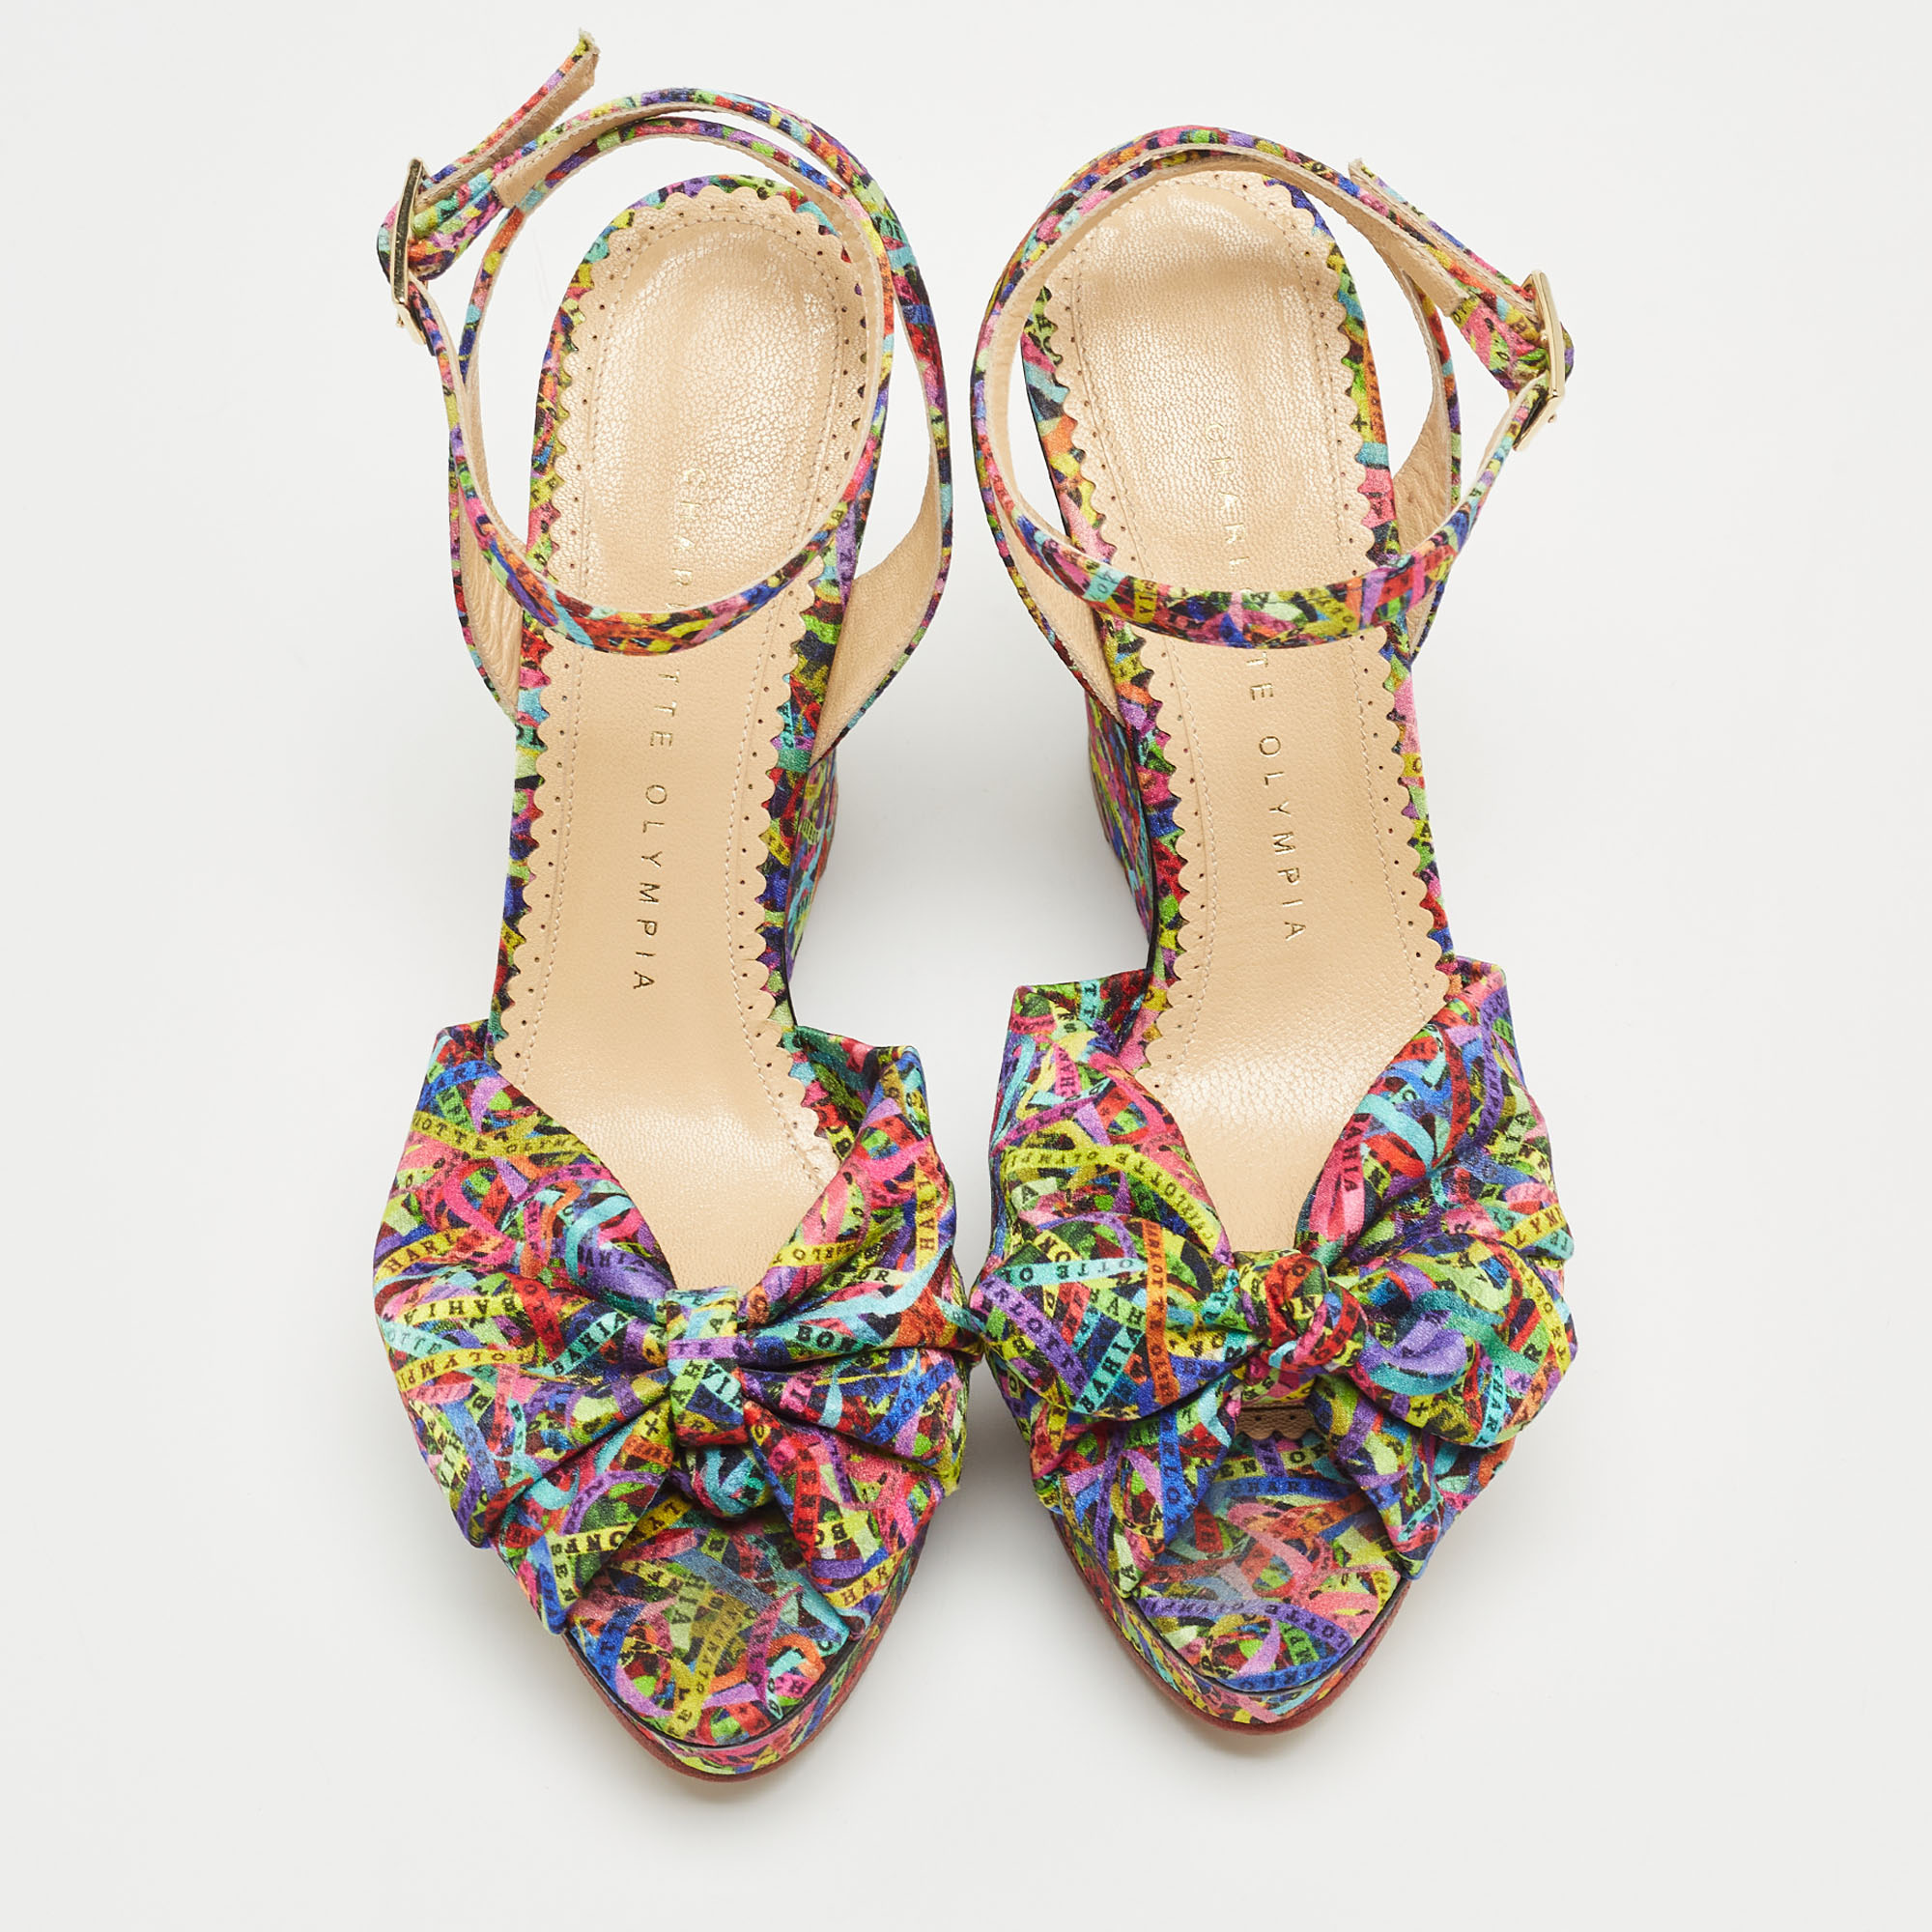 Charlotte Olympia Multicolor Printed Satin Wedge Platform Ankle Strap Sandals Size 38